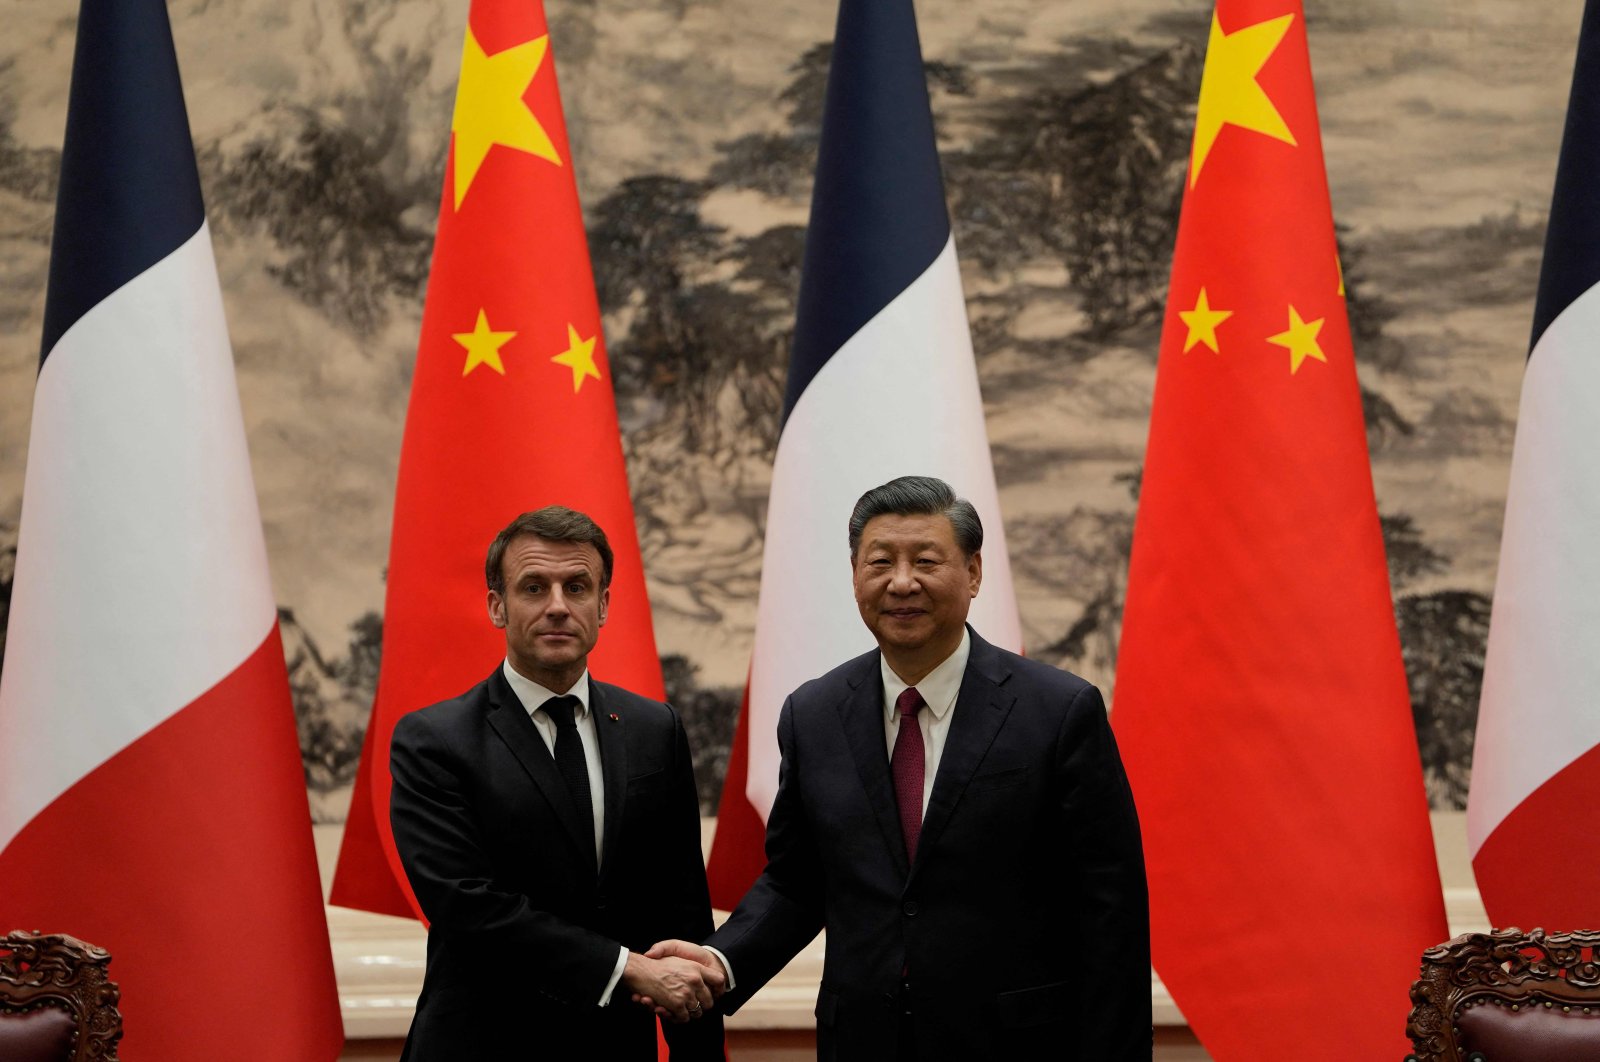 French President Emmanuel Macron (L) shakes hands with Chinese President Xi Jinping during a joint meeting in Beijing, China, April 6, 2023. (AFP Photo)